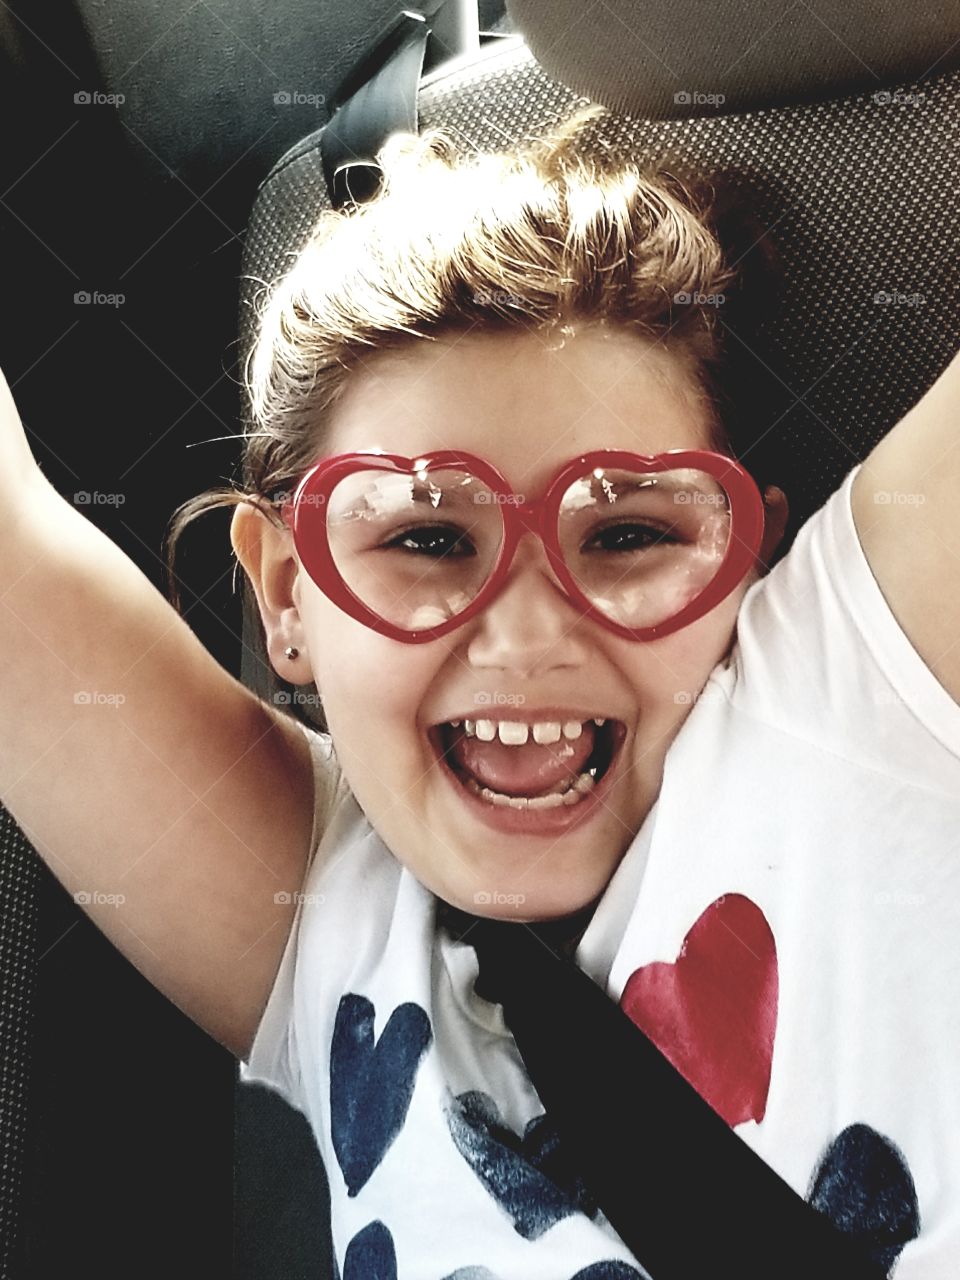 heart shaped glasses.  smiling child. happiness.  youthfulness.